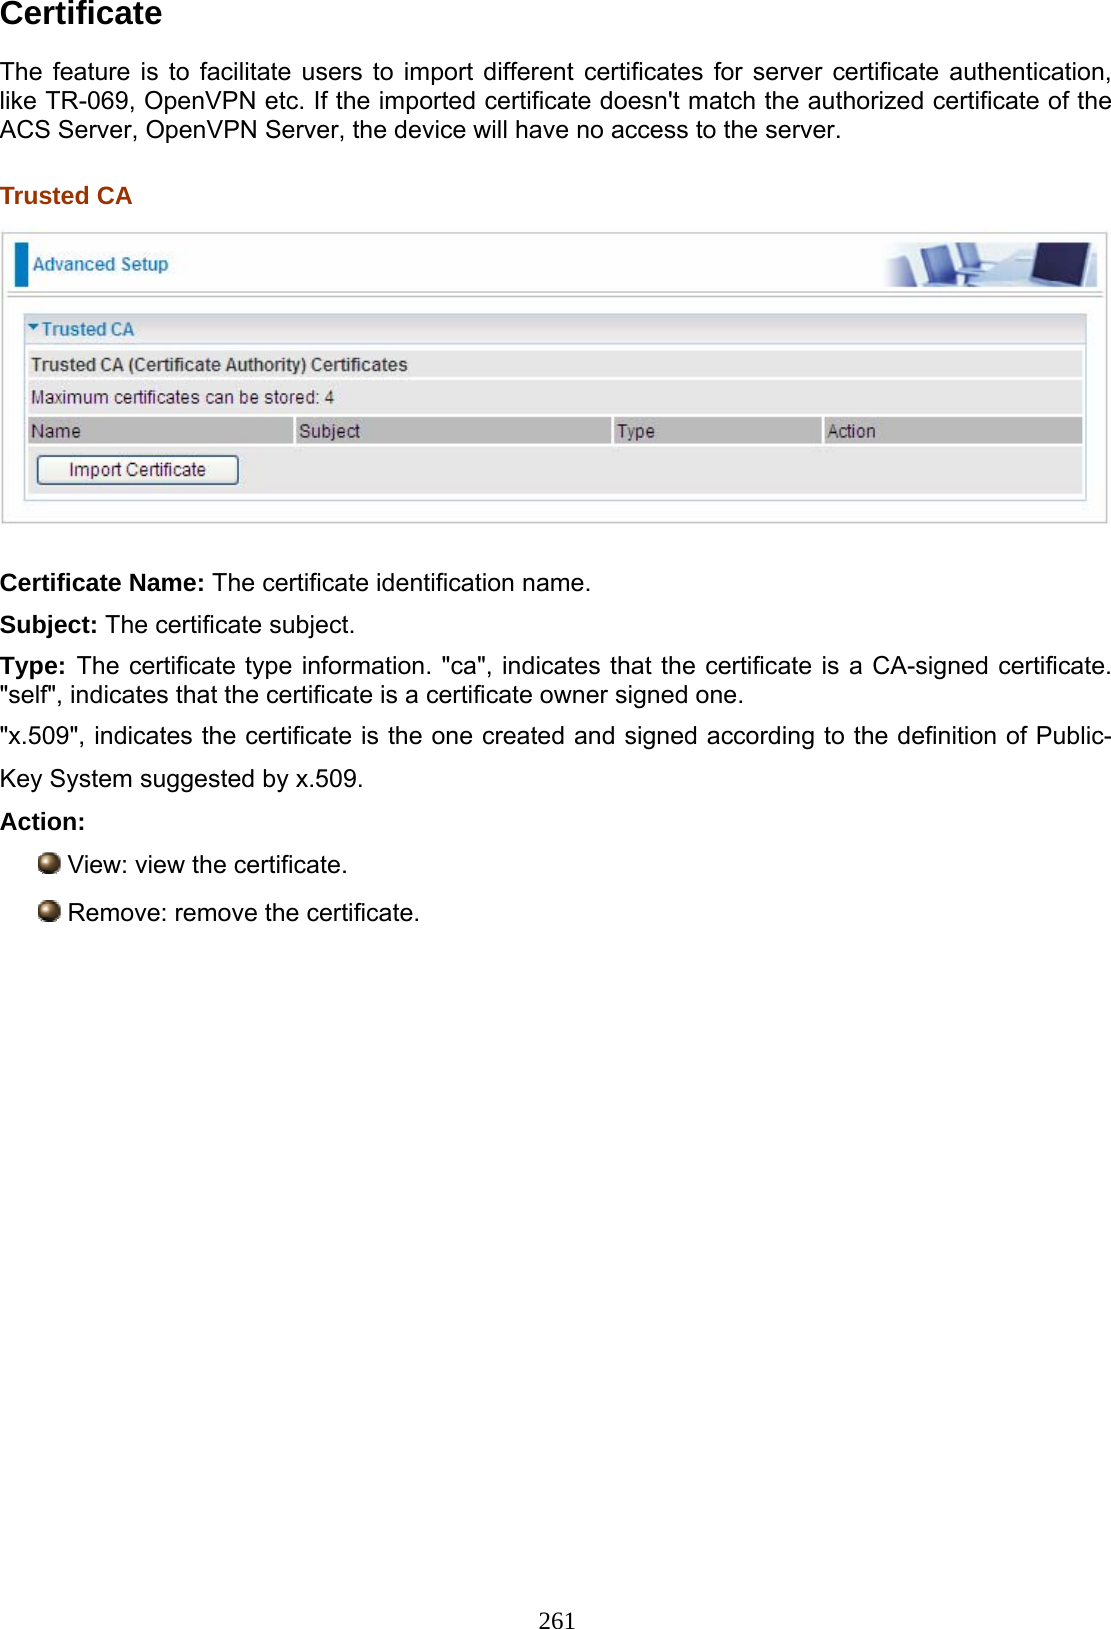 261 Certificate  The feature is to facilitate users to import different certificates for server certificate authentication, like TR-069, OpenVPN etc. If the imported certificate doesn&apos;t match the authorized certificate of the ACS Server, OpenVPN Server, the device will have no access to the server.  Trusted CA   Certificate Name: The certificate identification name. Subject: The certificate subject. Type: The certificate type information. &quot;ca&quot;, indicates that the certificate is a CA-signed certificate. &quot;self&quot;, indicates that the certificate is a certificate owner signed one. &quot;x.509&quot;, indicates the certificate is the one created and signed according to the definition of Public-Key System suggested by x.509. Action:  View: view the certificate.  Remove: remove the certificate.            